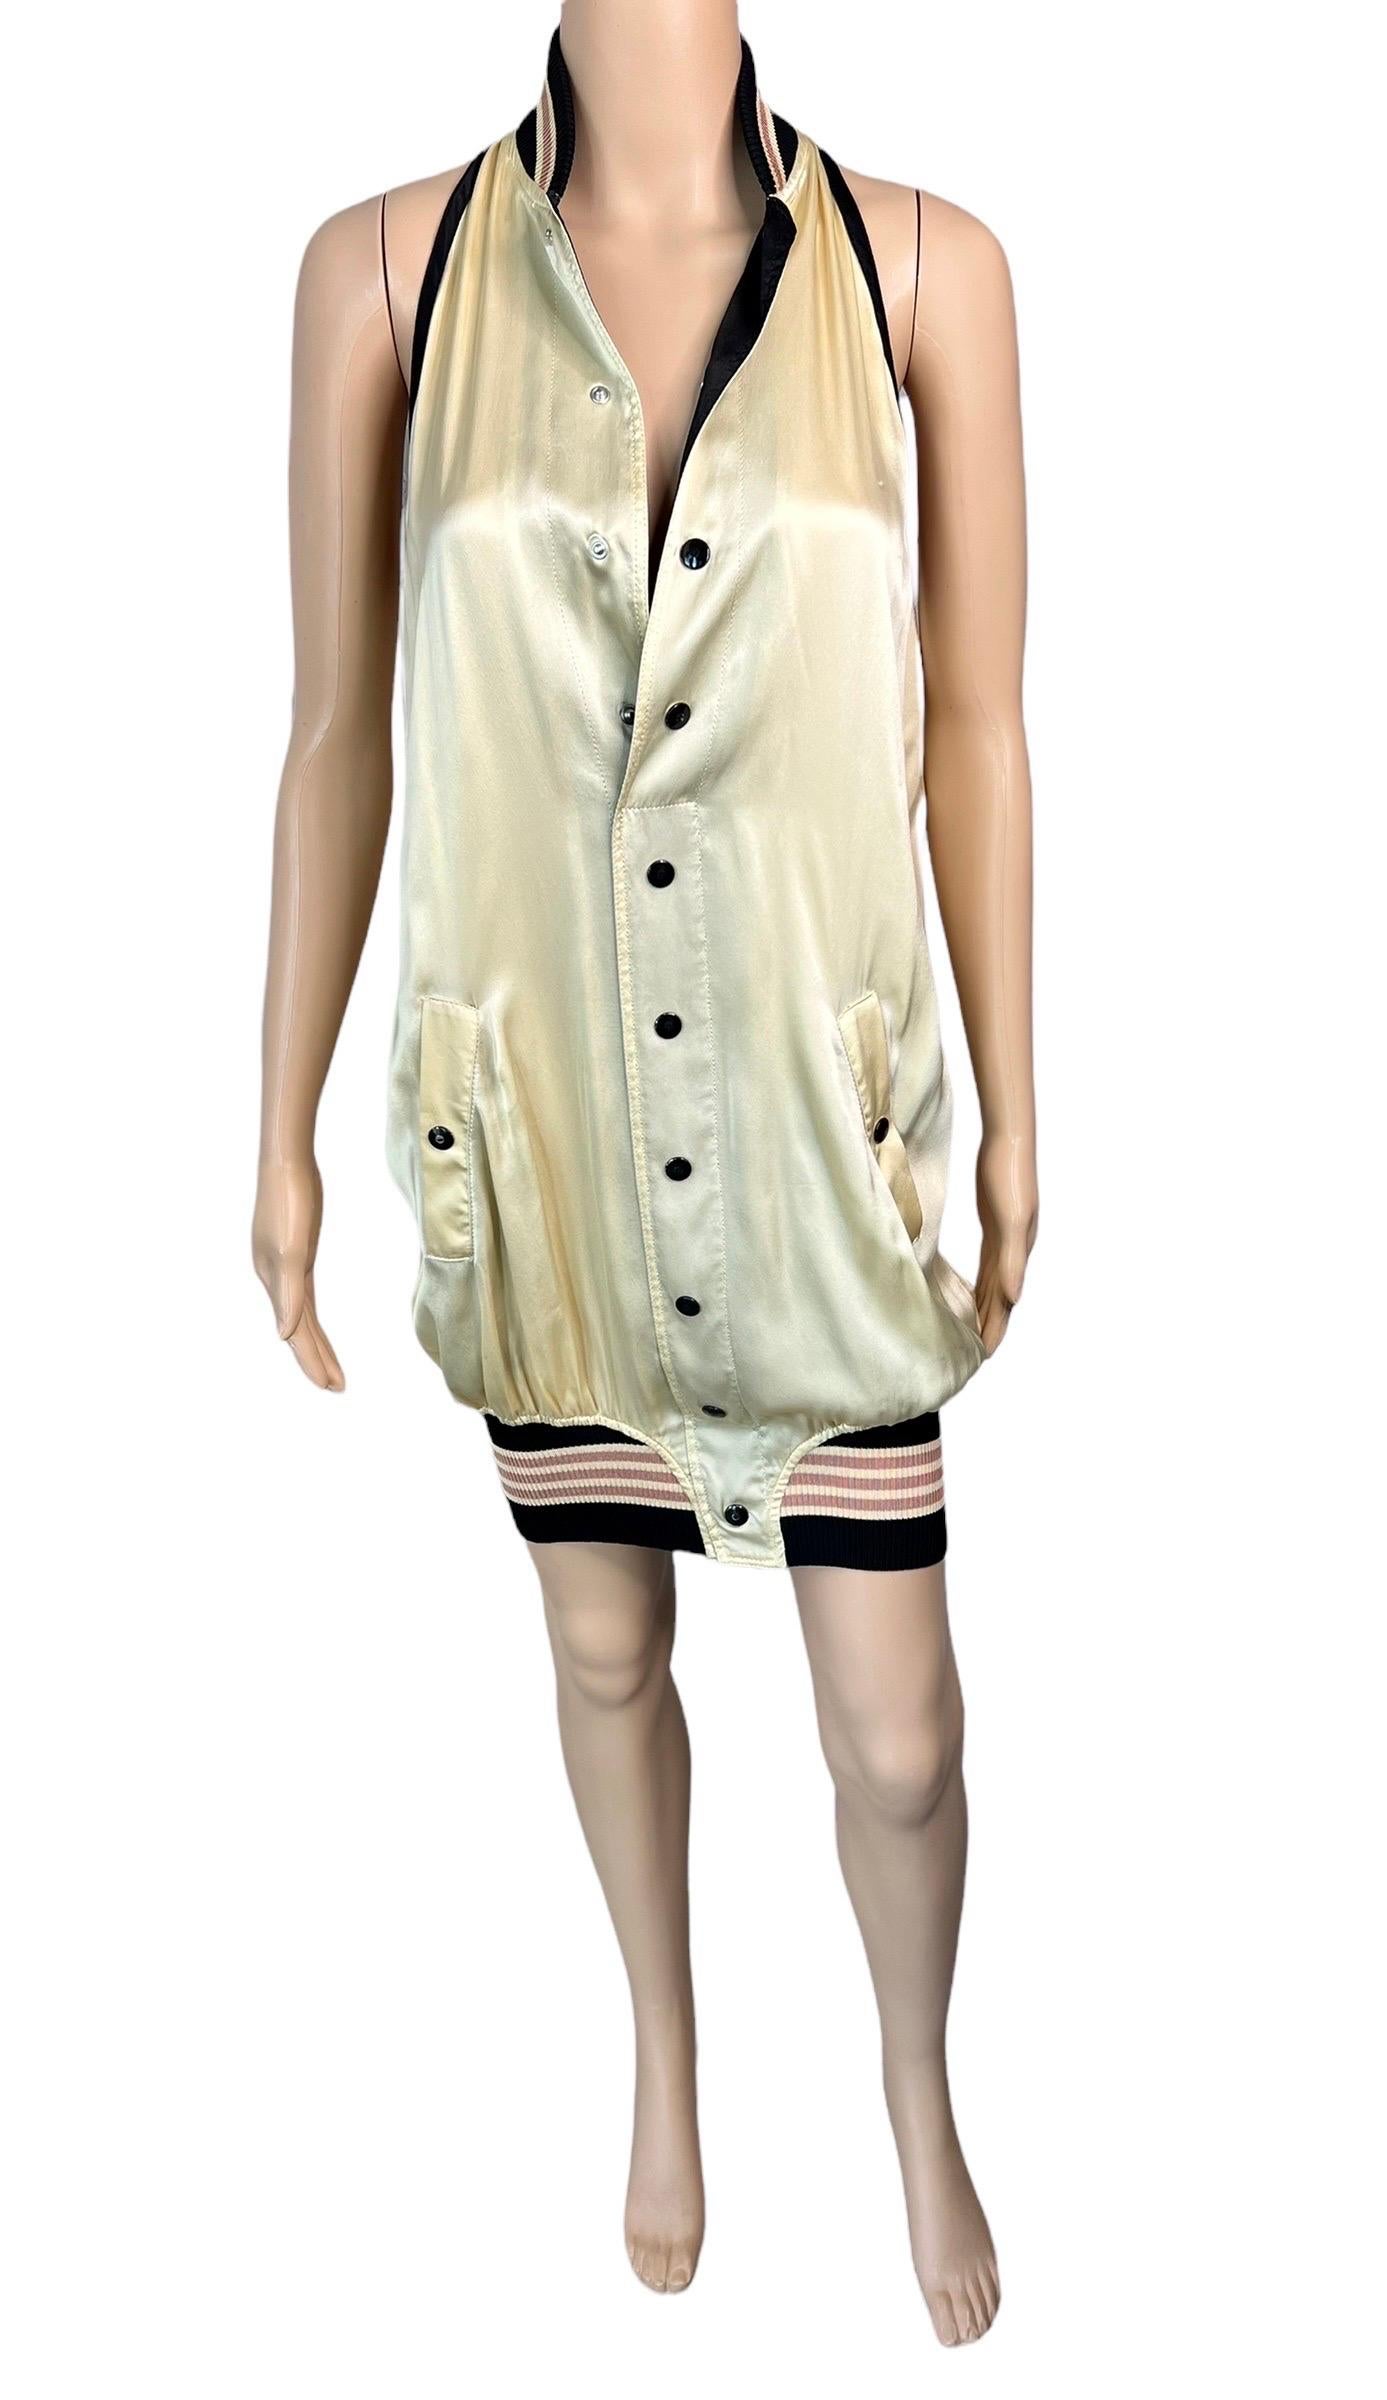 Jean Paul Gaultier S/S 2007 Runway Embroidered Logo Silk Mini Dress In Good Condition For Sale In Naples, FL